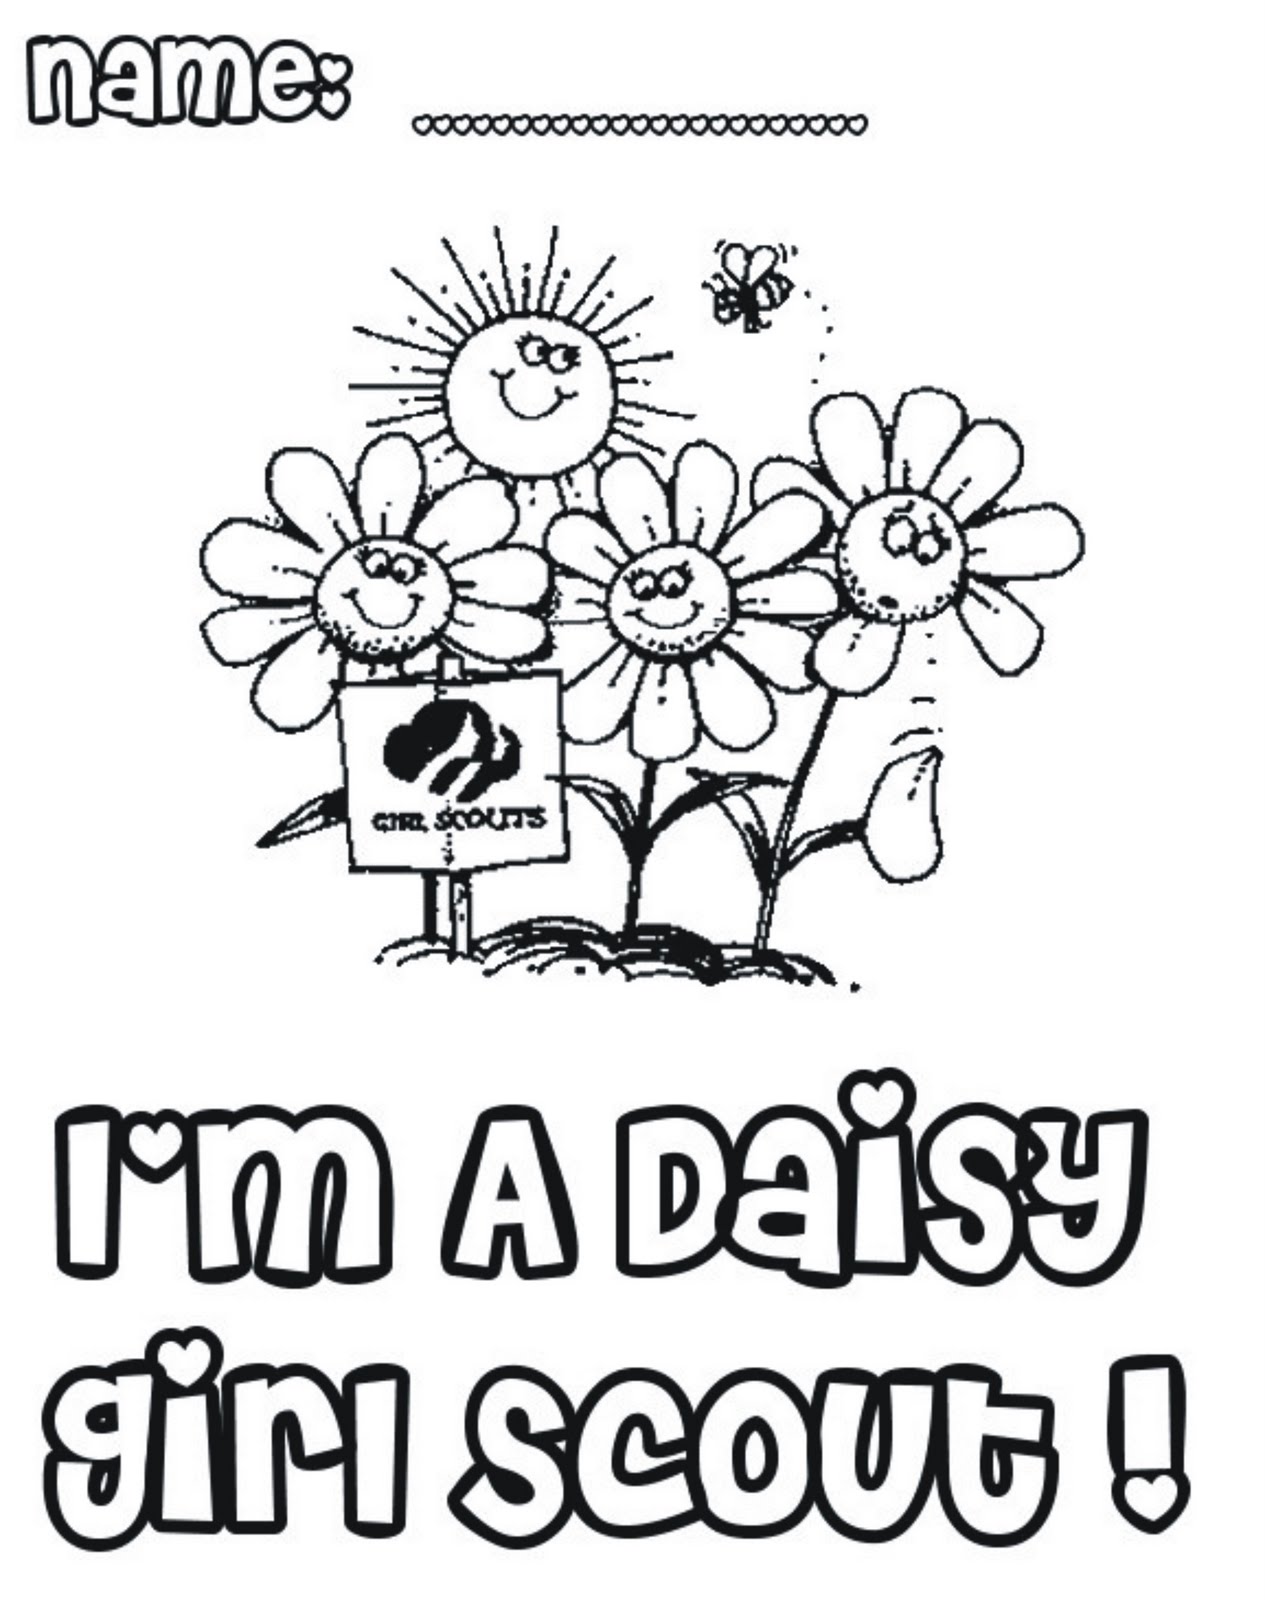 Free Daisy Girl Scouts Coloring Page Free Download Free Clip Art Coloring Home